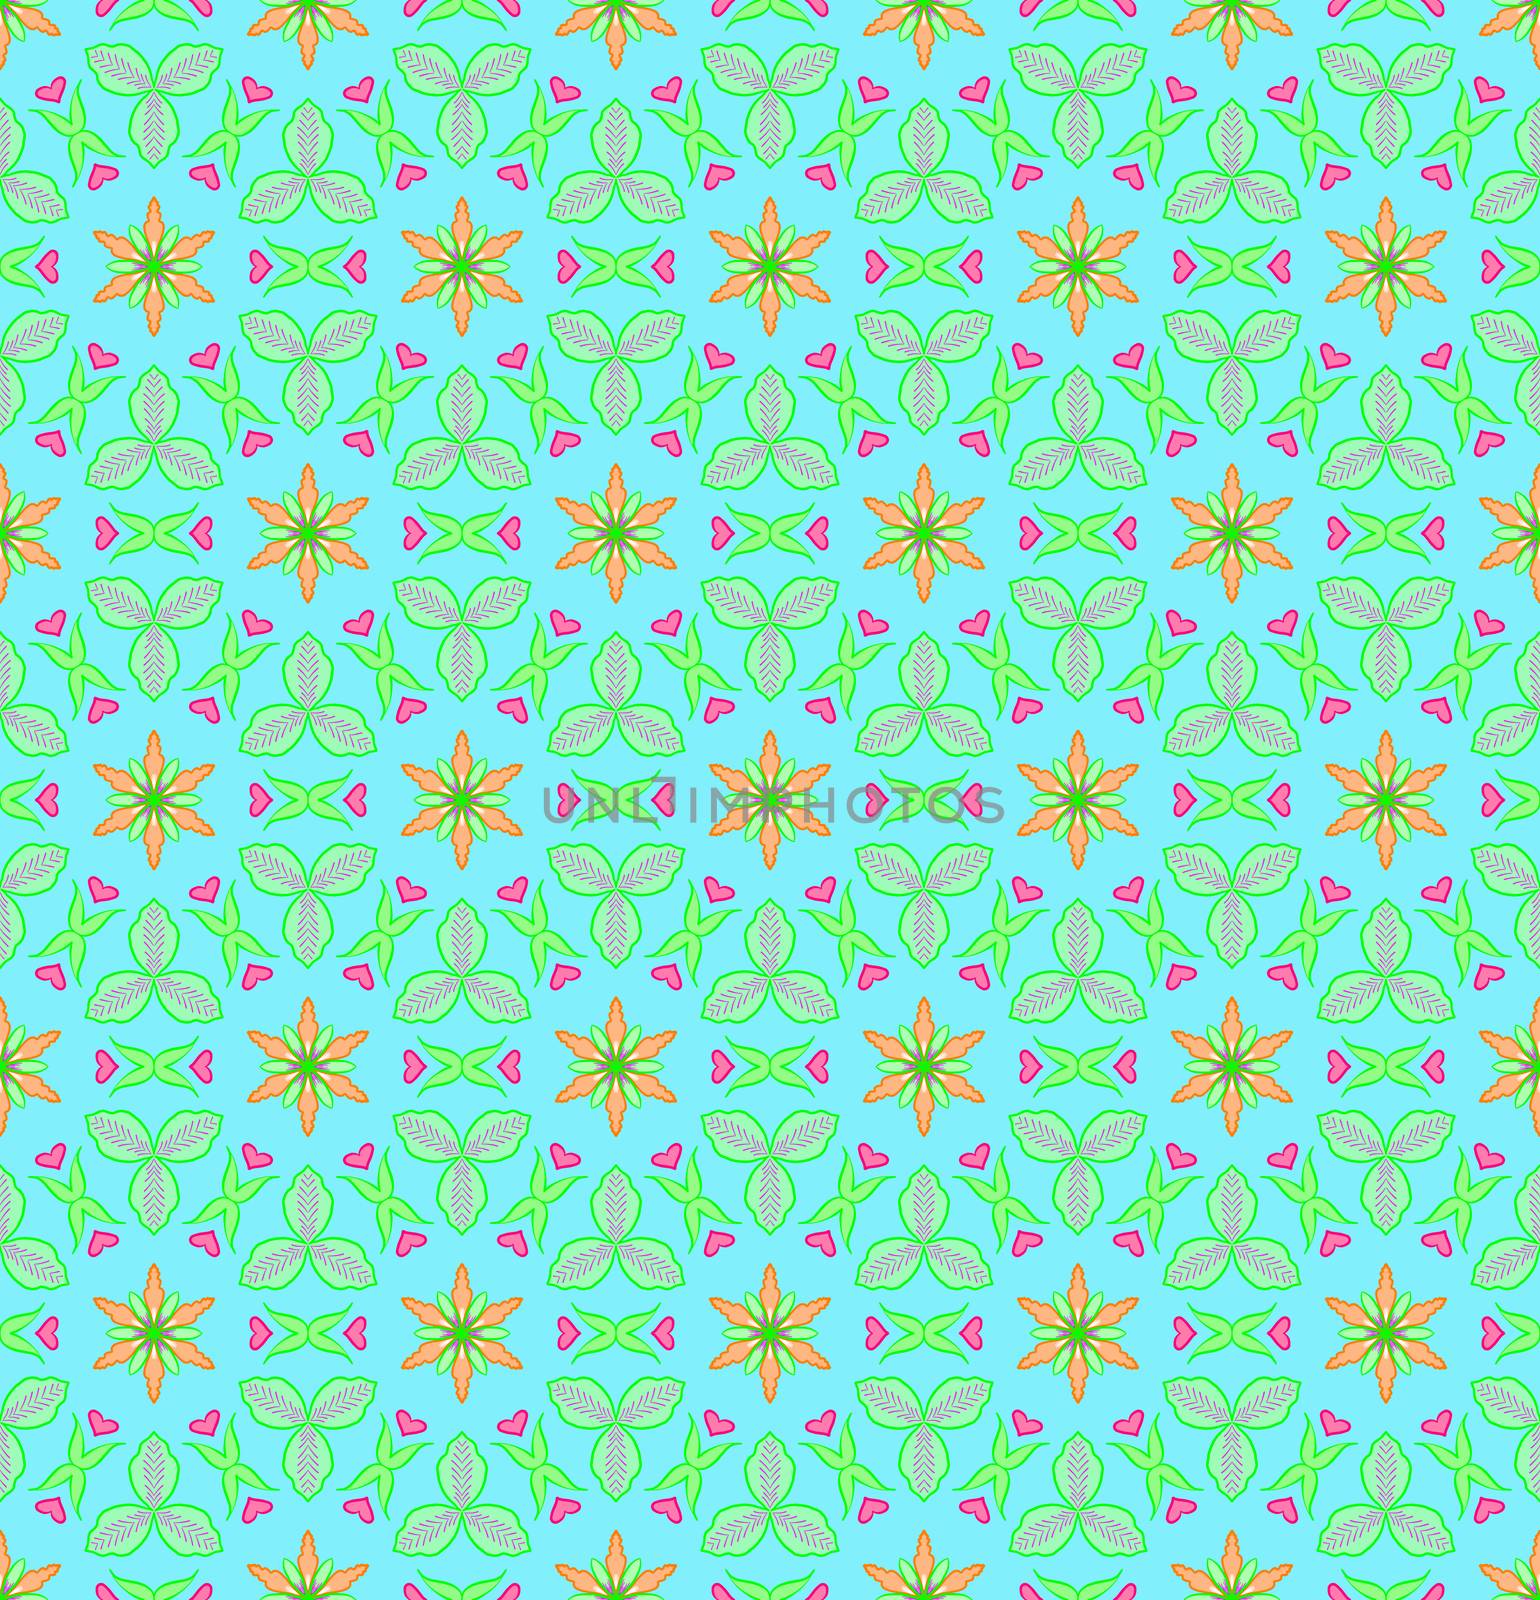 Green and orange flower with pink heart shape is seamless patterns can be used for wallpaper pattern fills and background. Valentine day concept.